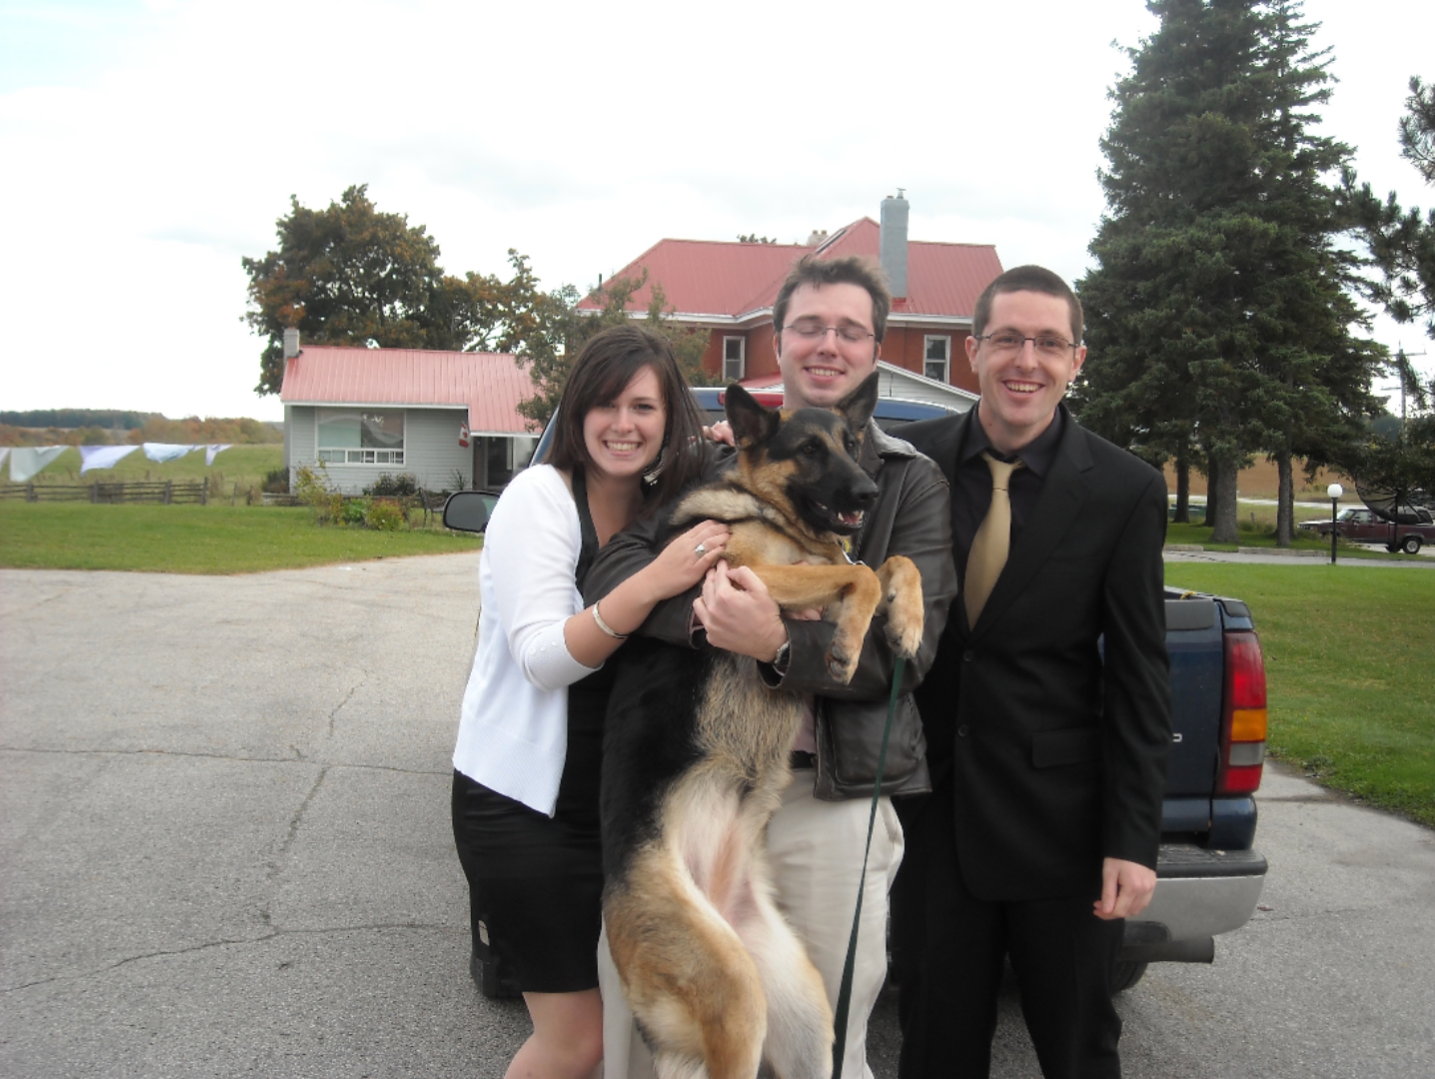 A young woman and two young men standing outside in formal dress, smiling. The man in the centre is hugging a large german shepherd to his chest, raising the dog to standing position. A large, red-roofed lake house, lake and green trees are in the background.